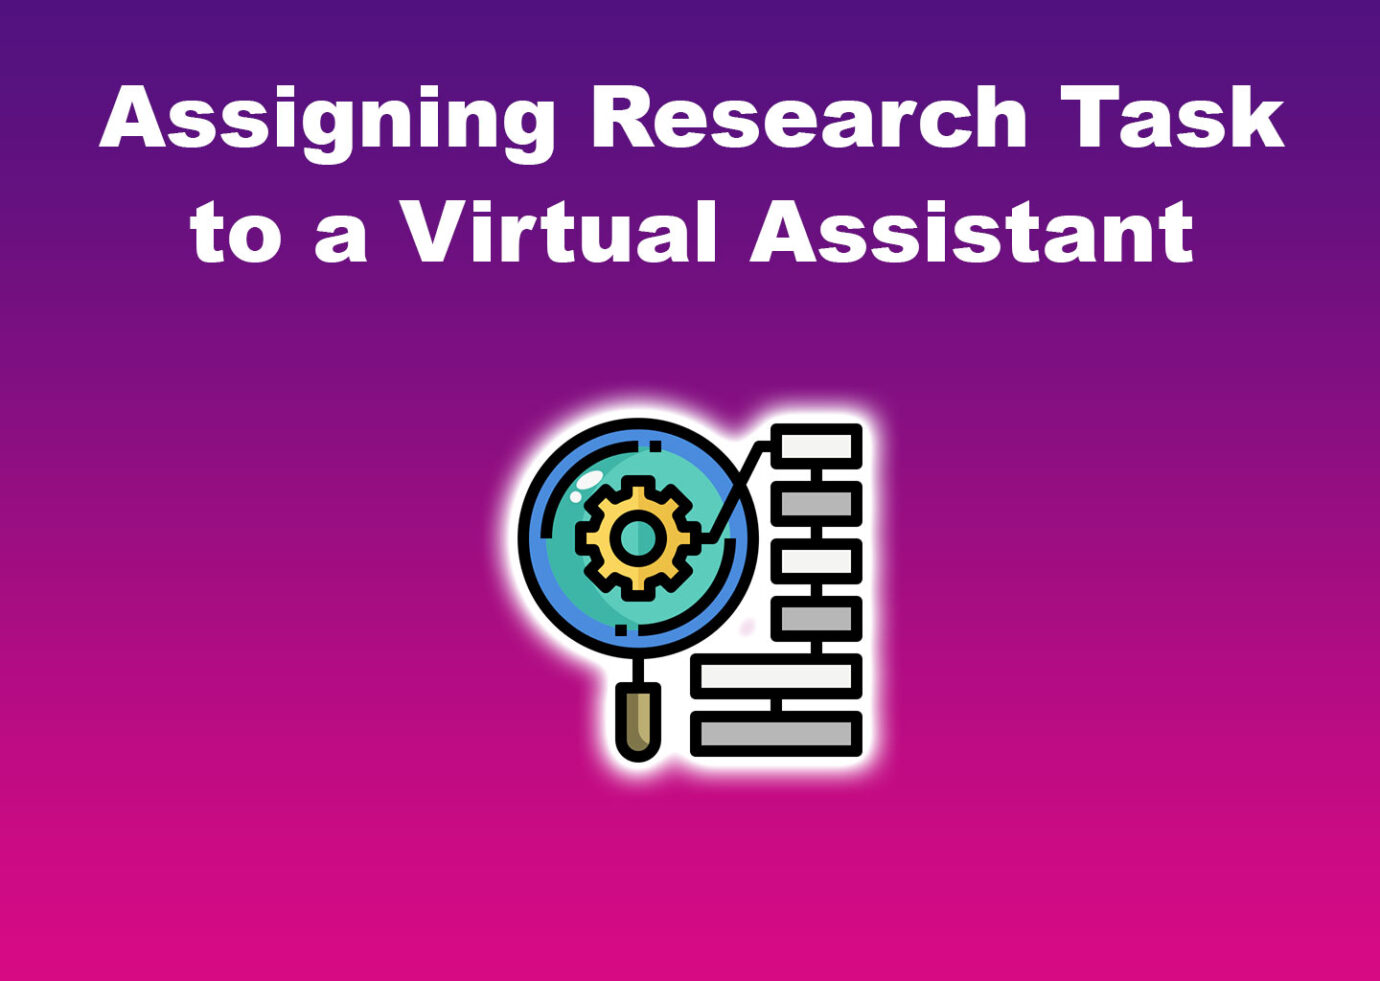 Assigning Research Task to a Virtual Assistant